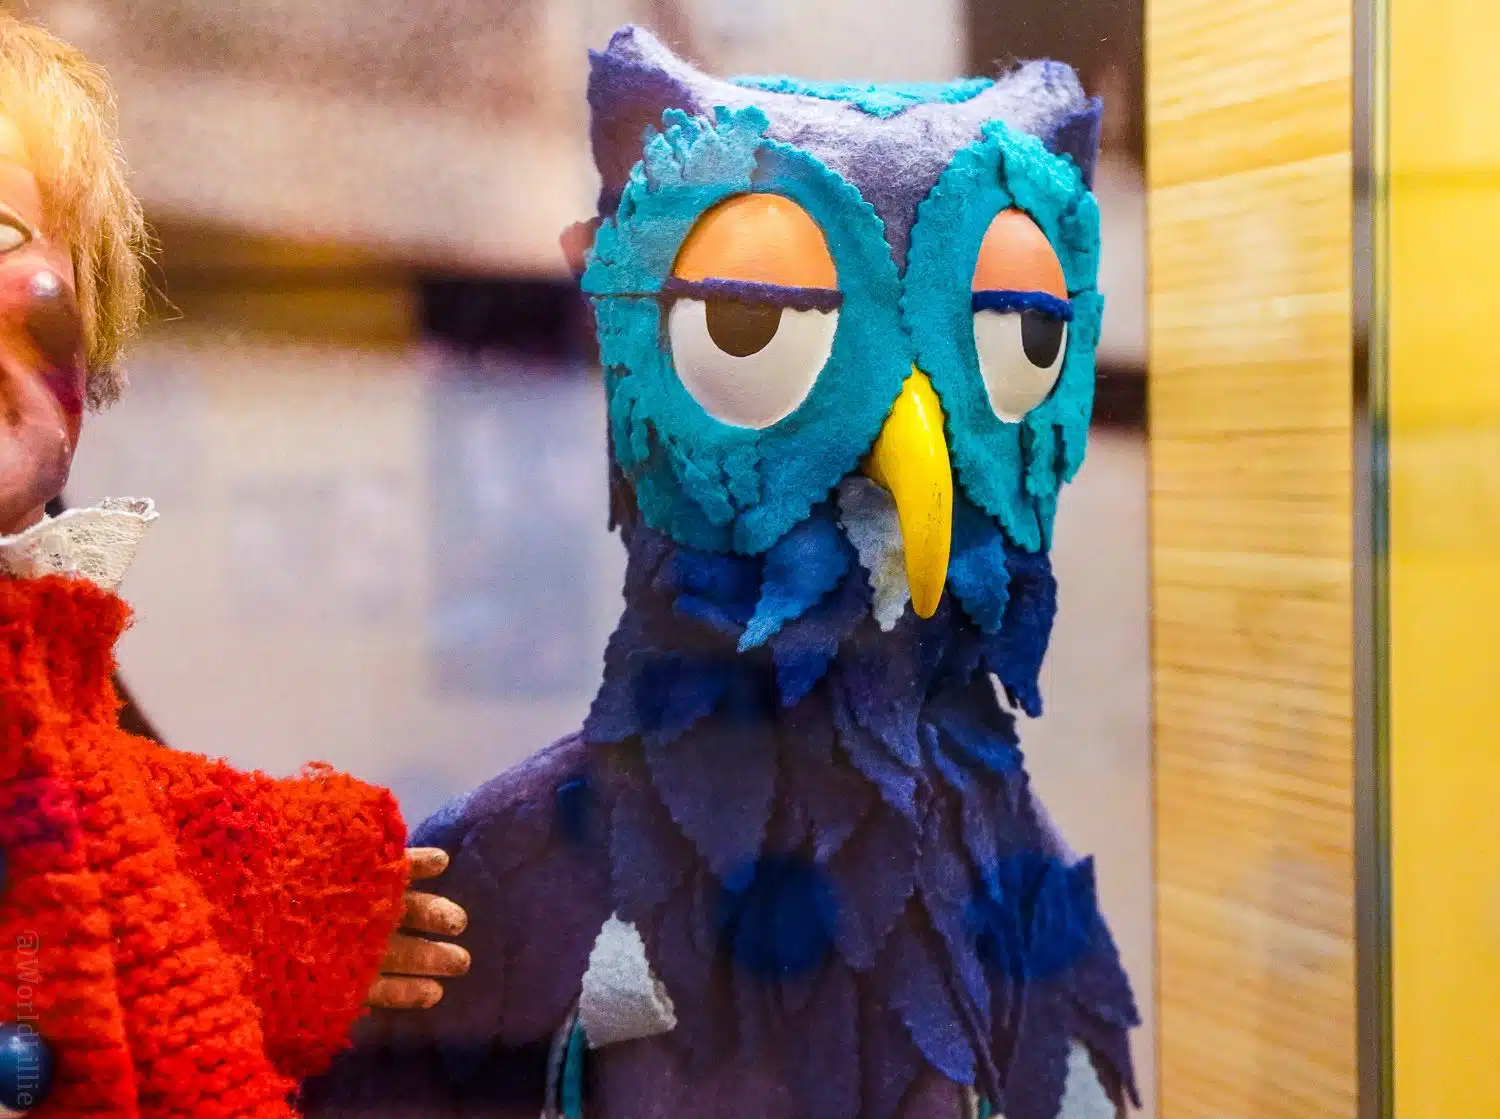 The "X the Owl" puppet.